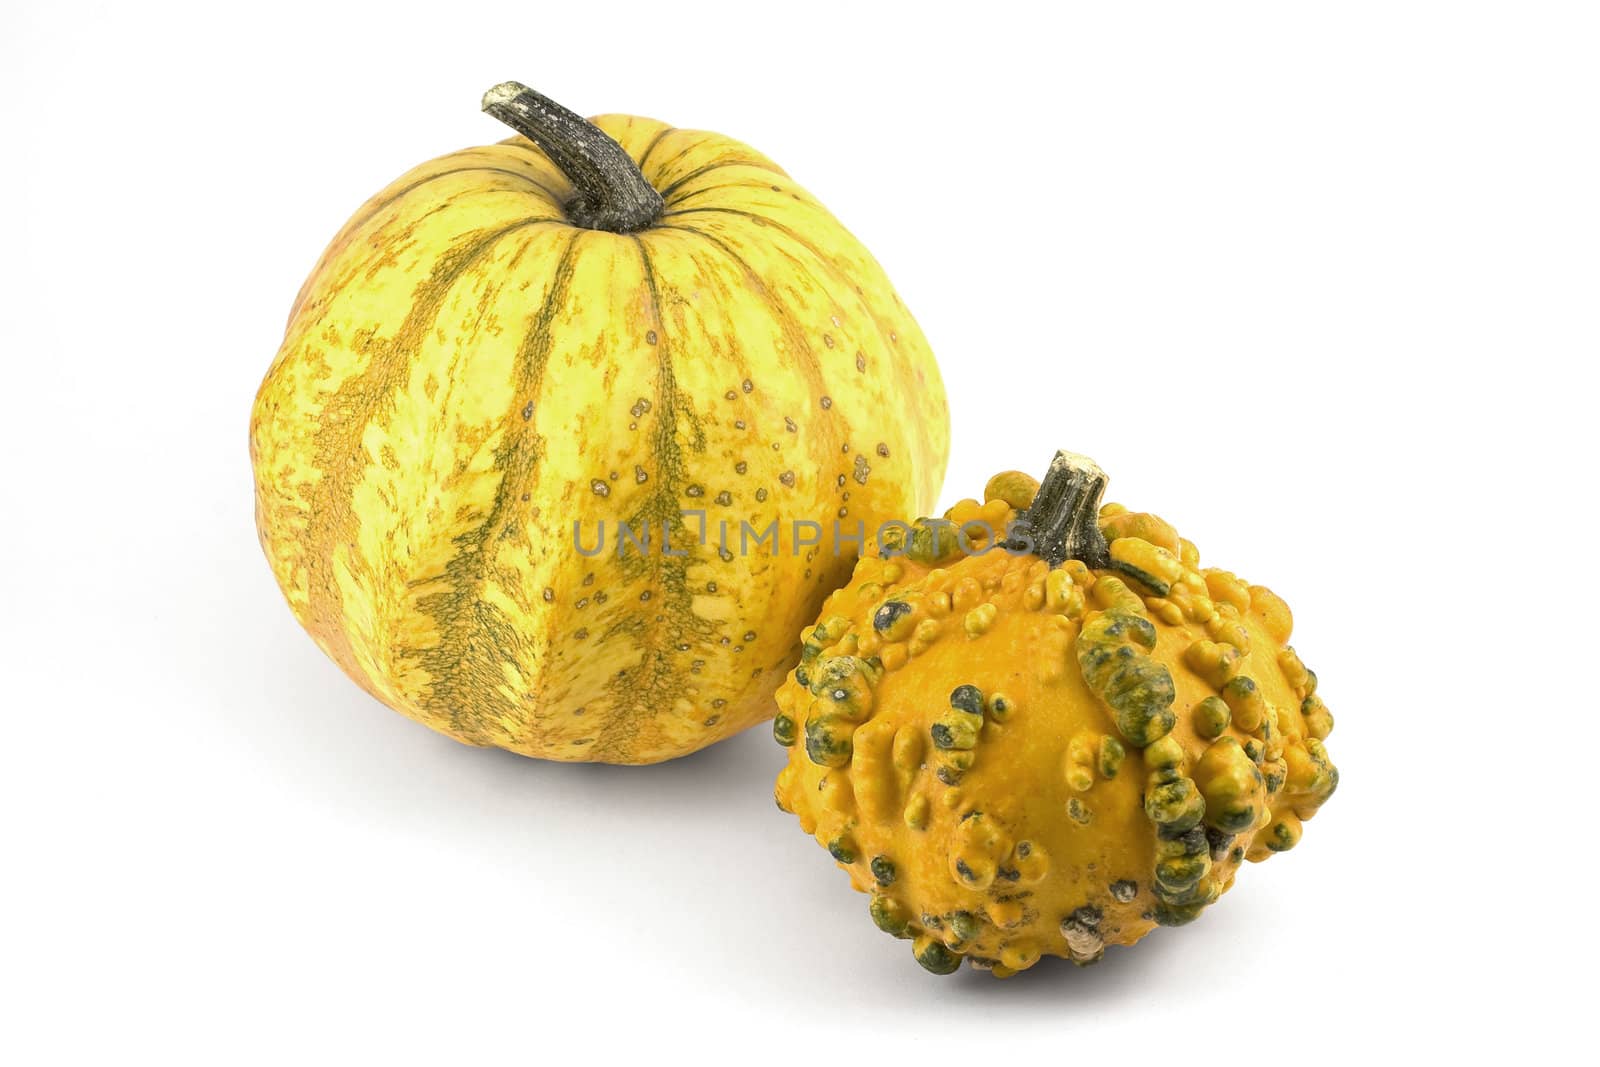 Two Decorative Pumpkins by newt96